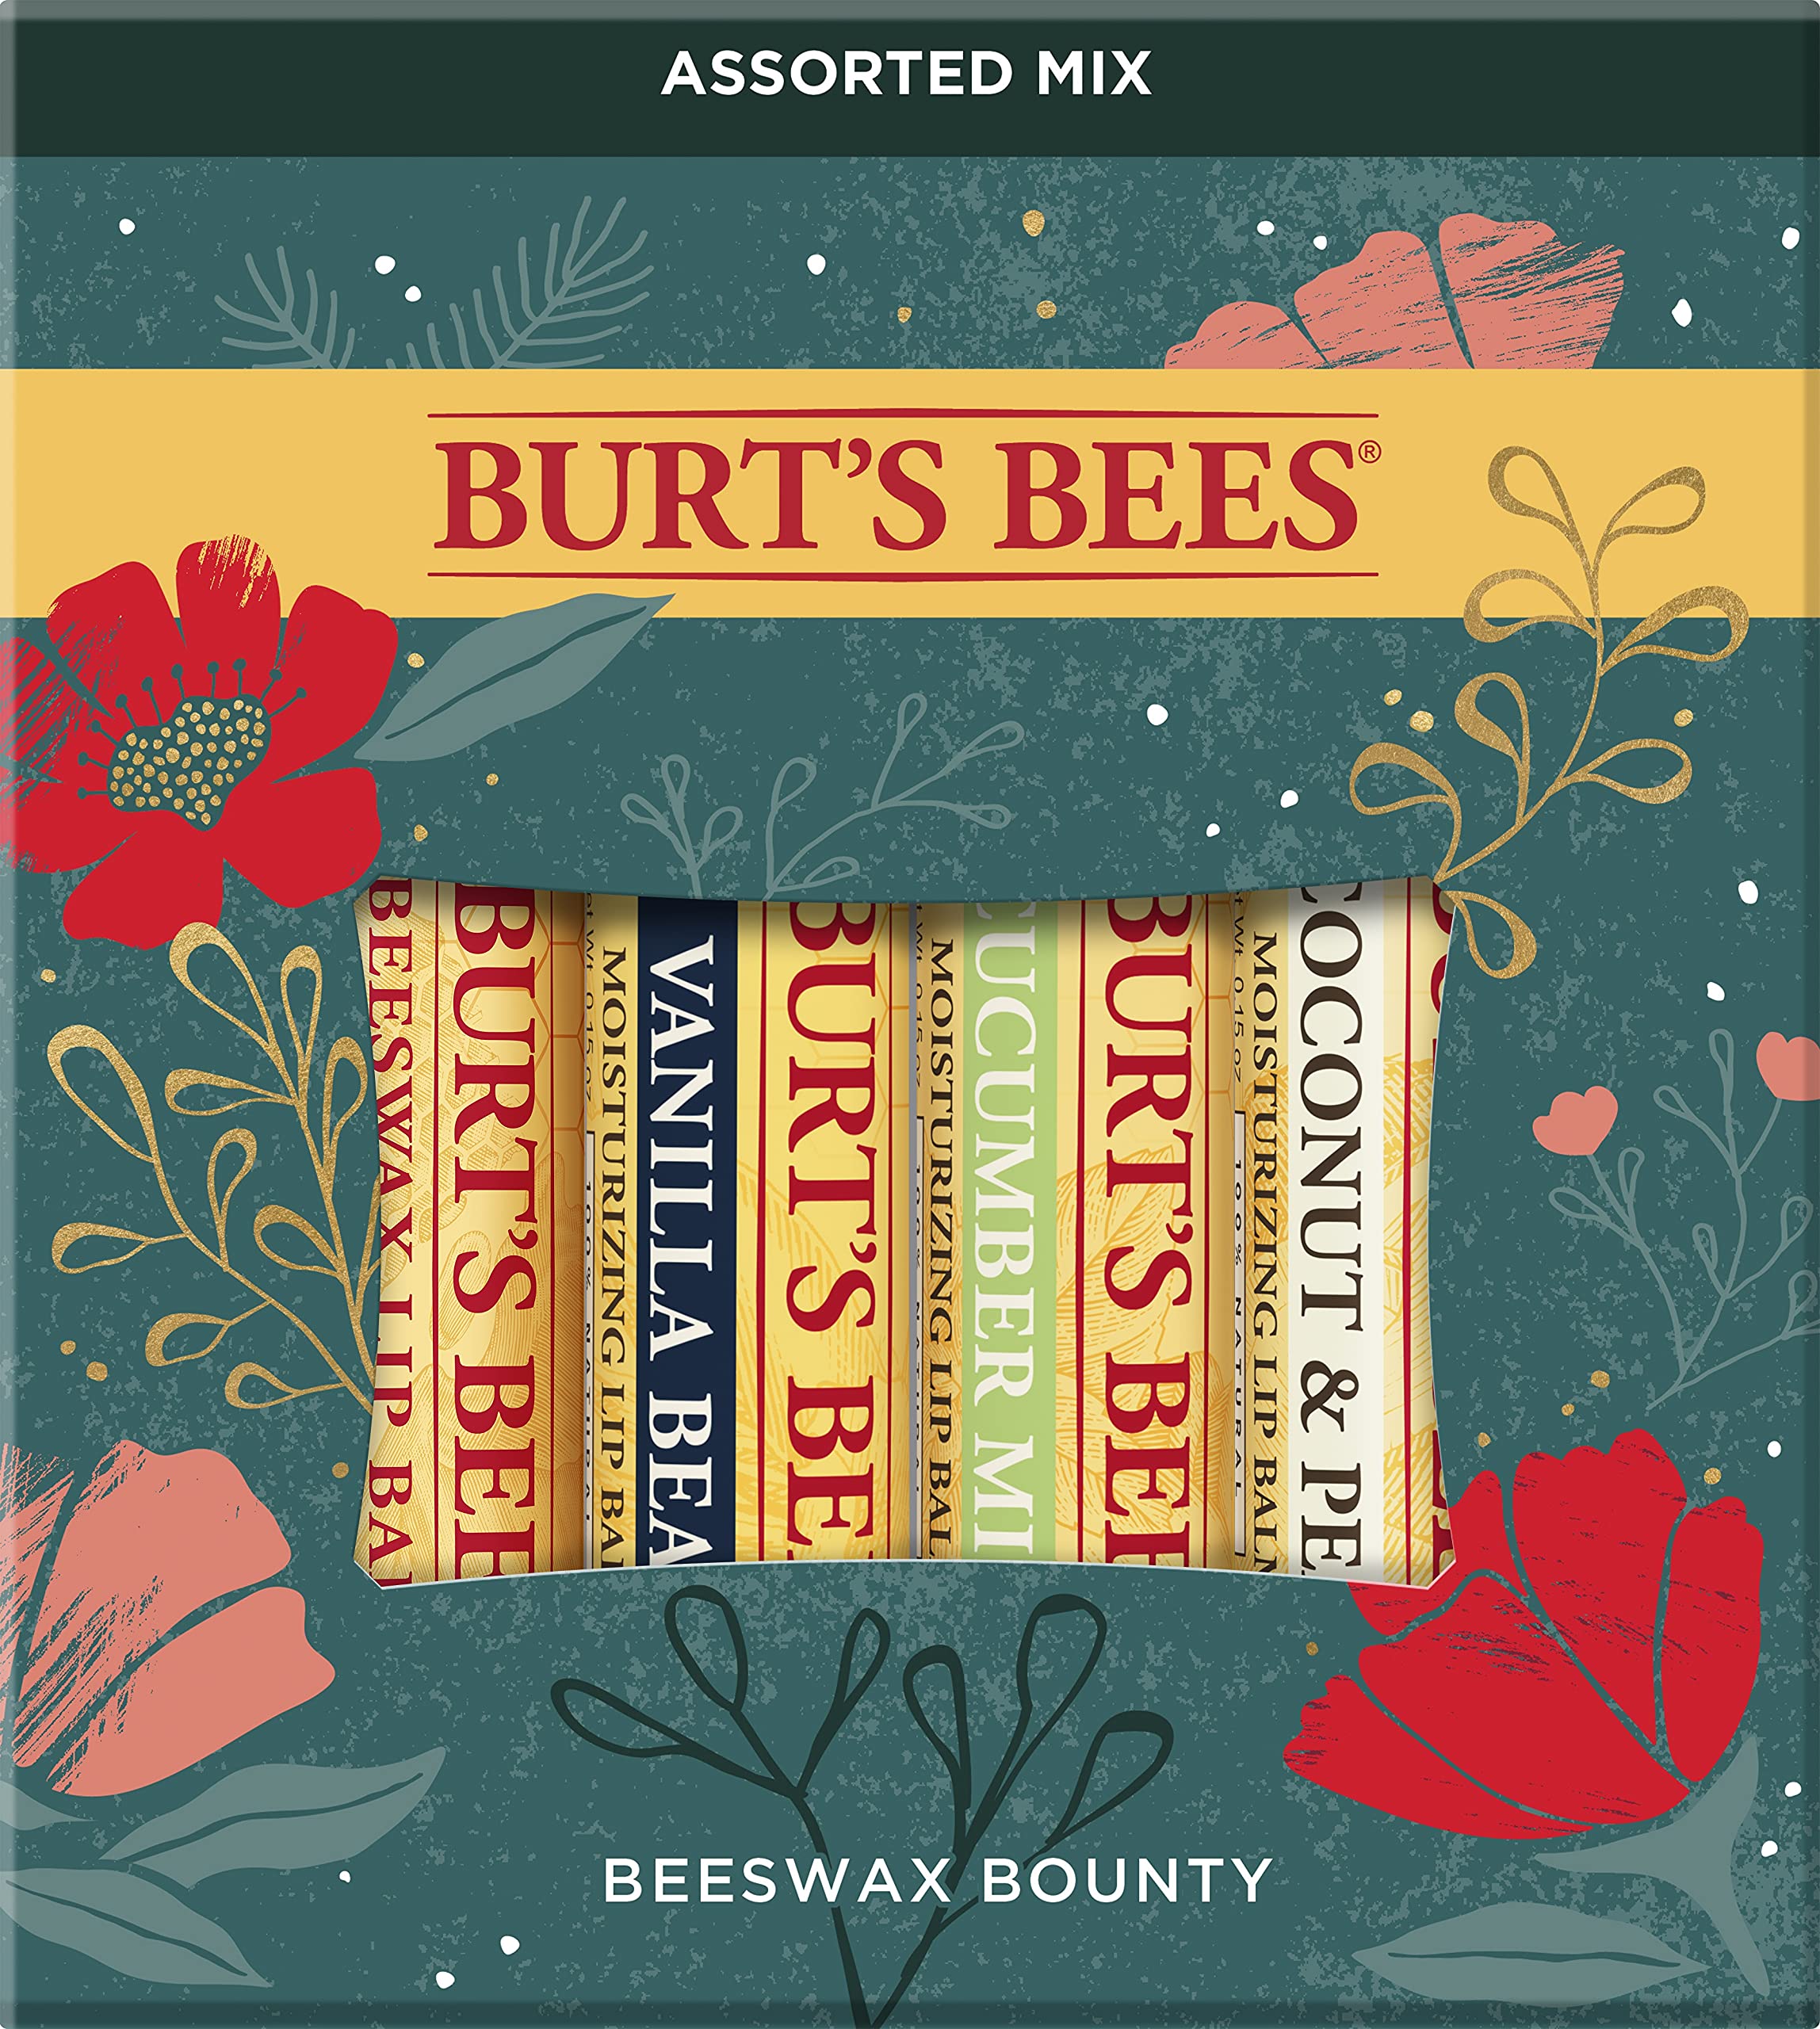 Burts Bees Beeswax Bounty Set - Assorted Mix for Unisex 4 x 0.15 oz